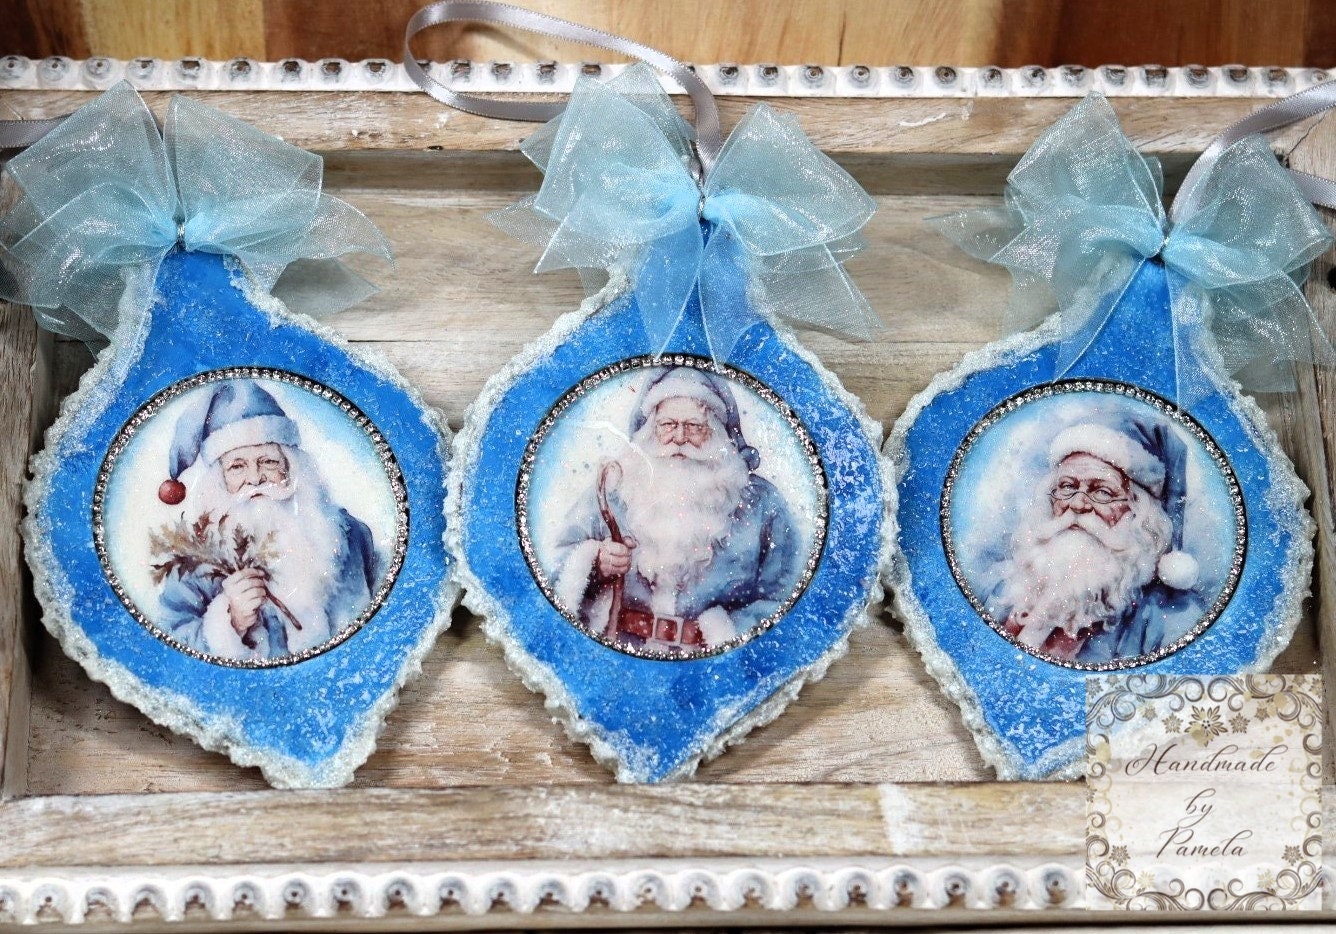 Handcrafted, Shabby Chic, Mixed Media, Decoupage, Blue, Santa, Ice, Snow, Christmas Ornament Set of 3, Holiday, Decoration, Collectible